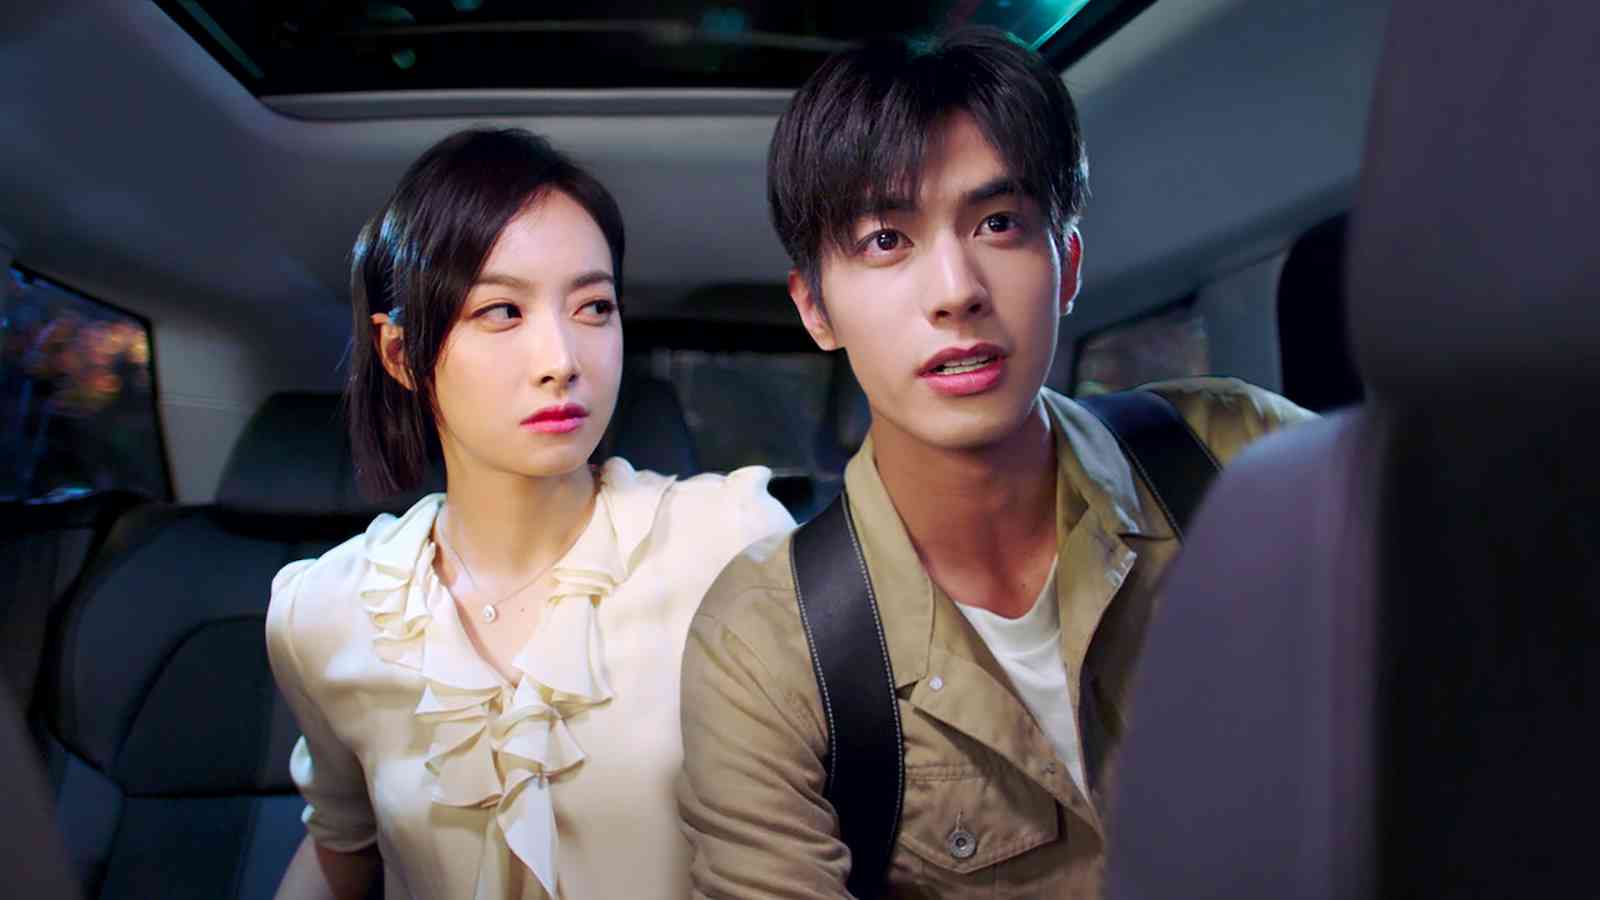 In the search for the perfect C-drama, you most likely have stumbled upon 'Find Yourself'. If you didn't watch it, you need to. You'll quickly fall in love.